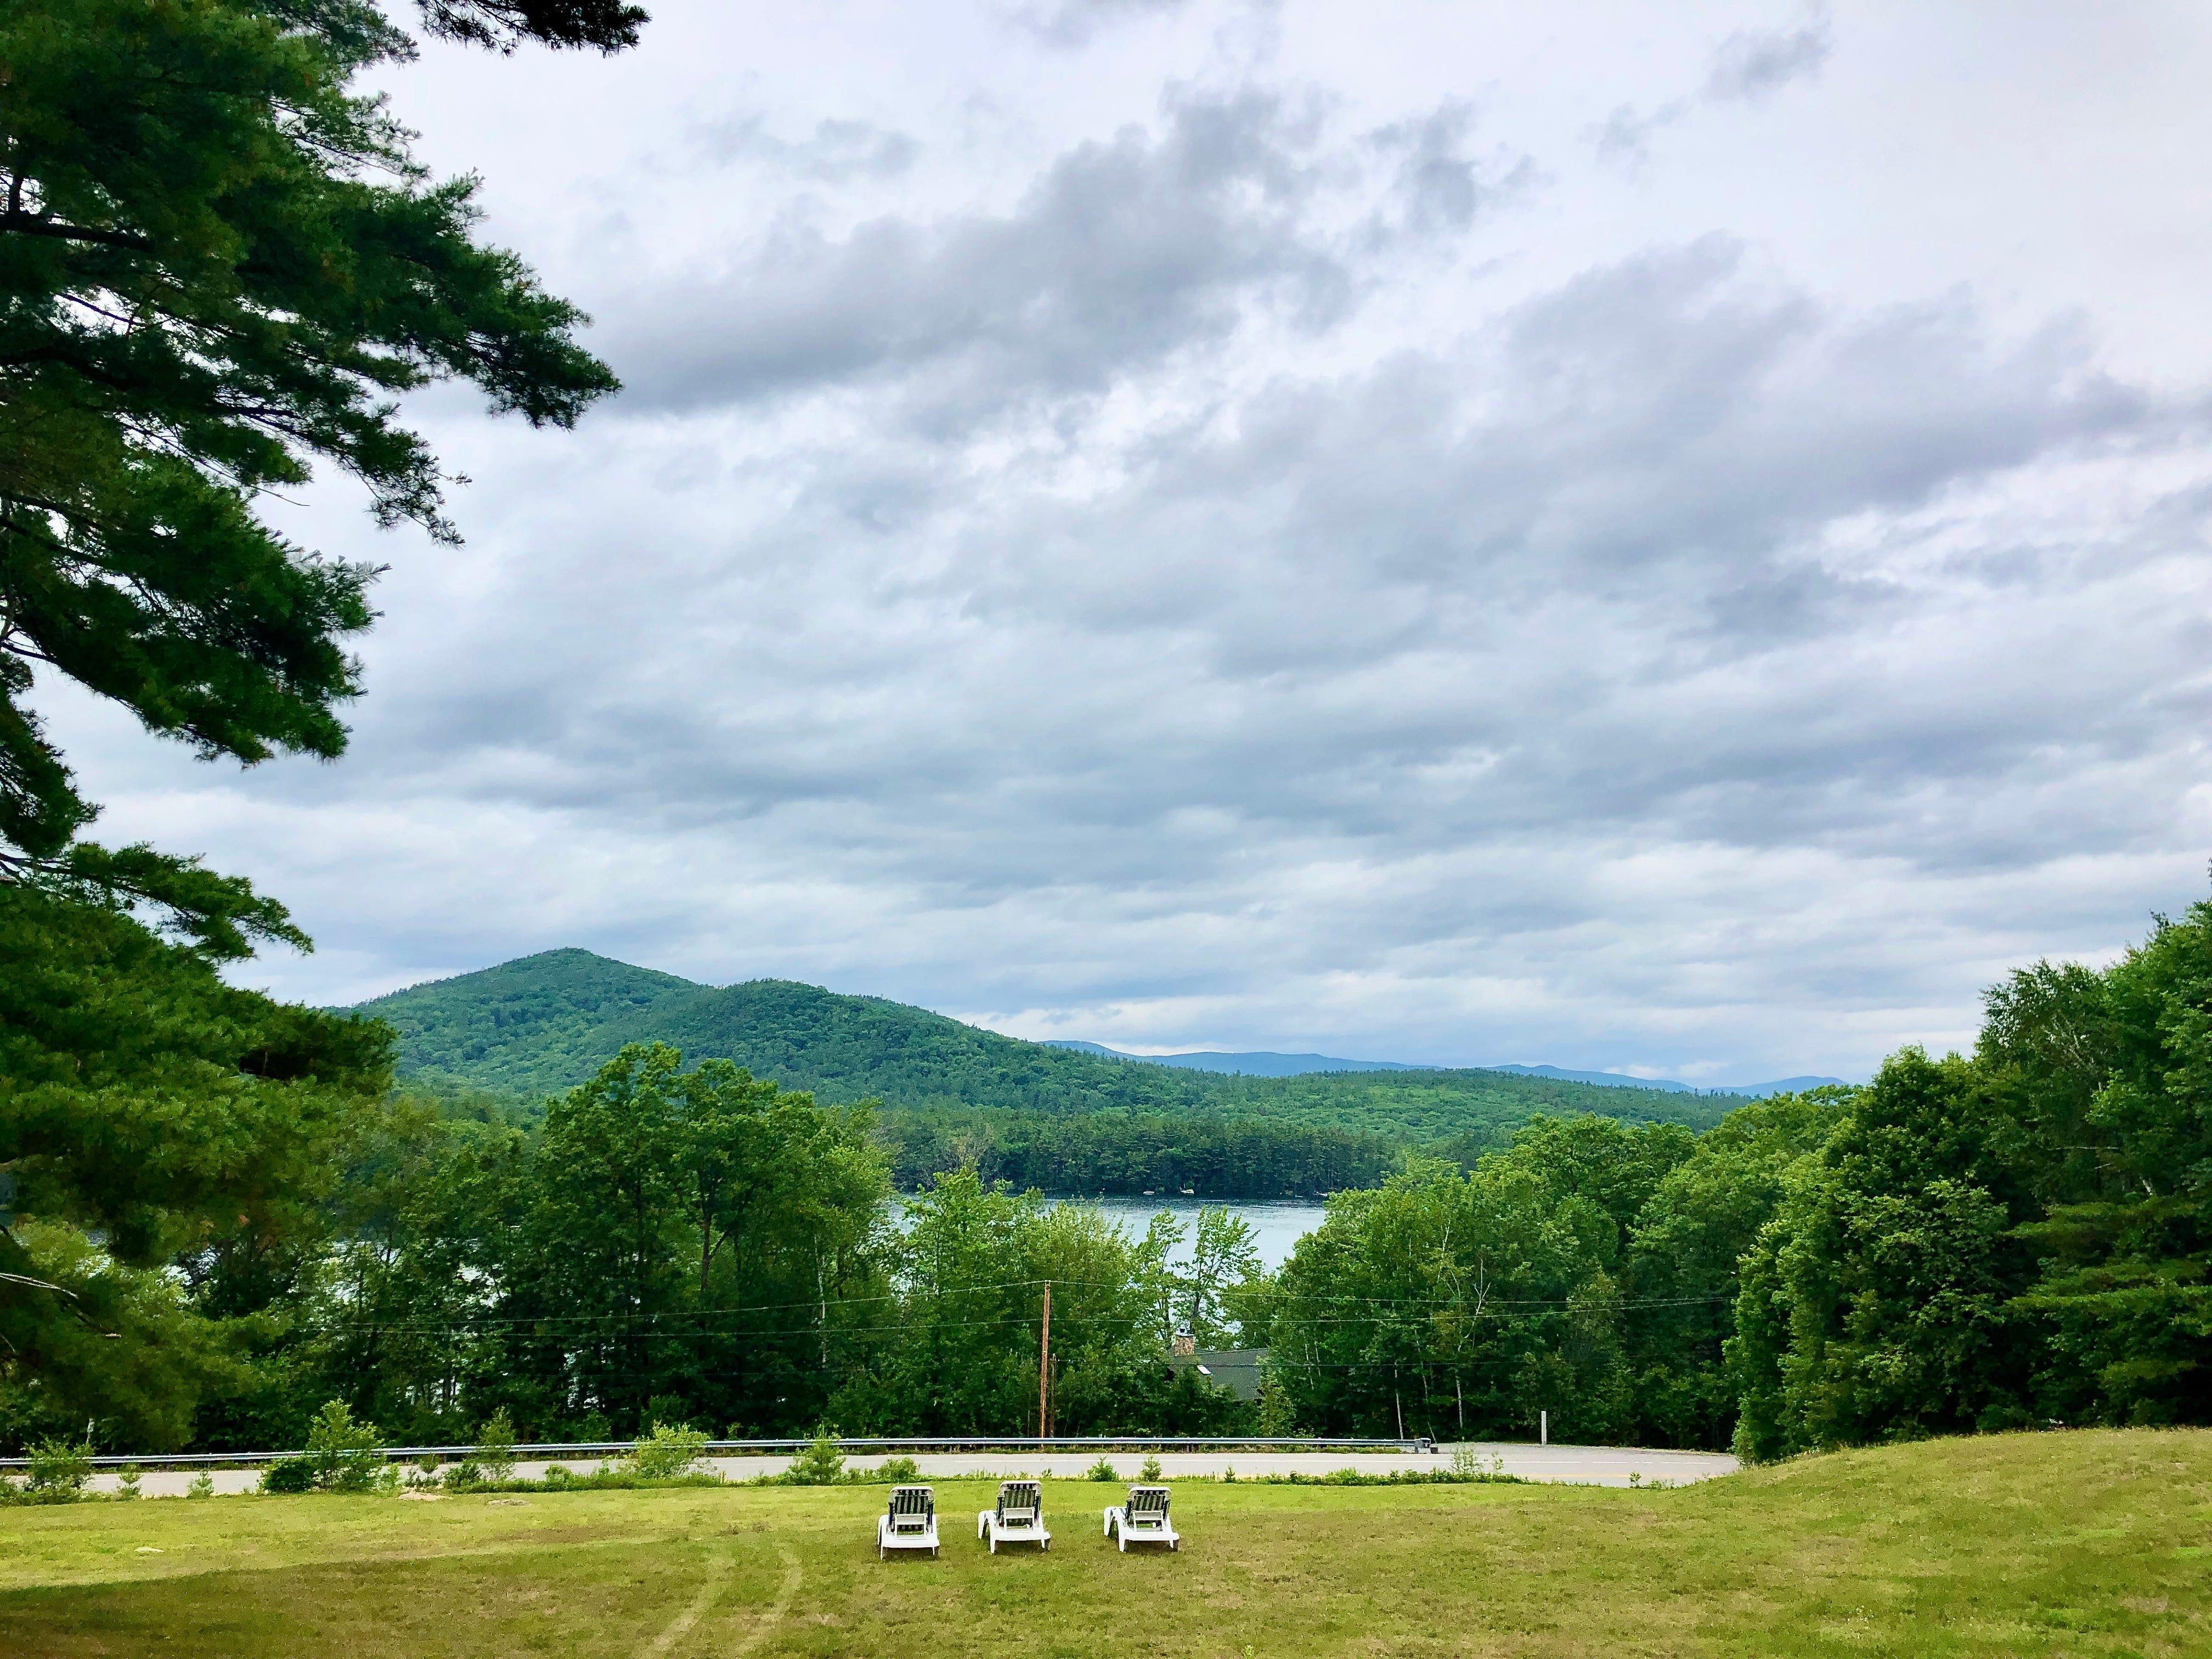 The view of Squam Lake and the Squam Range from the Manor on Golden Pond’s lawn.